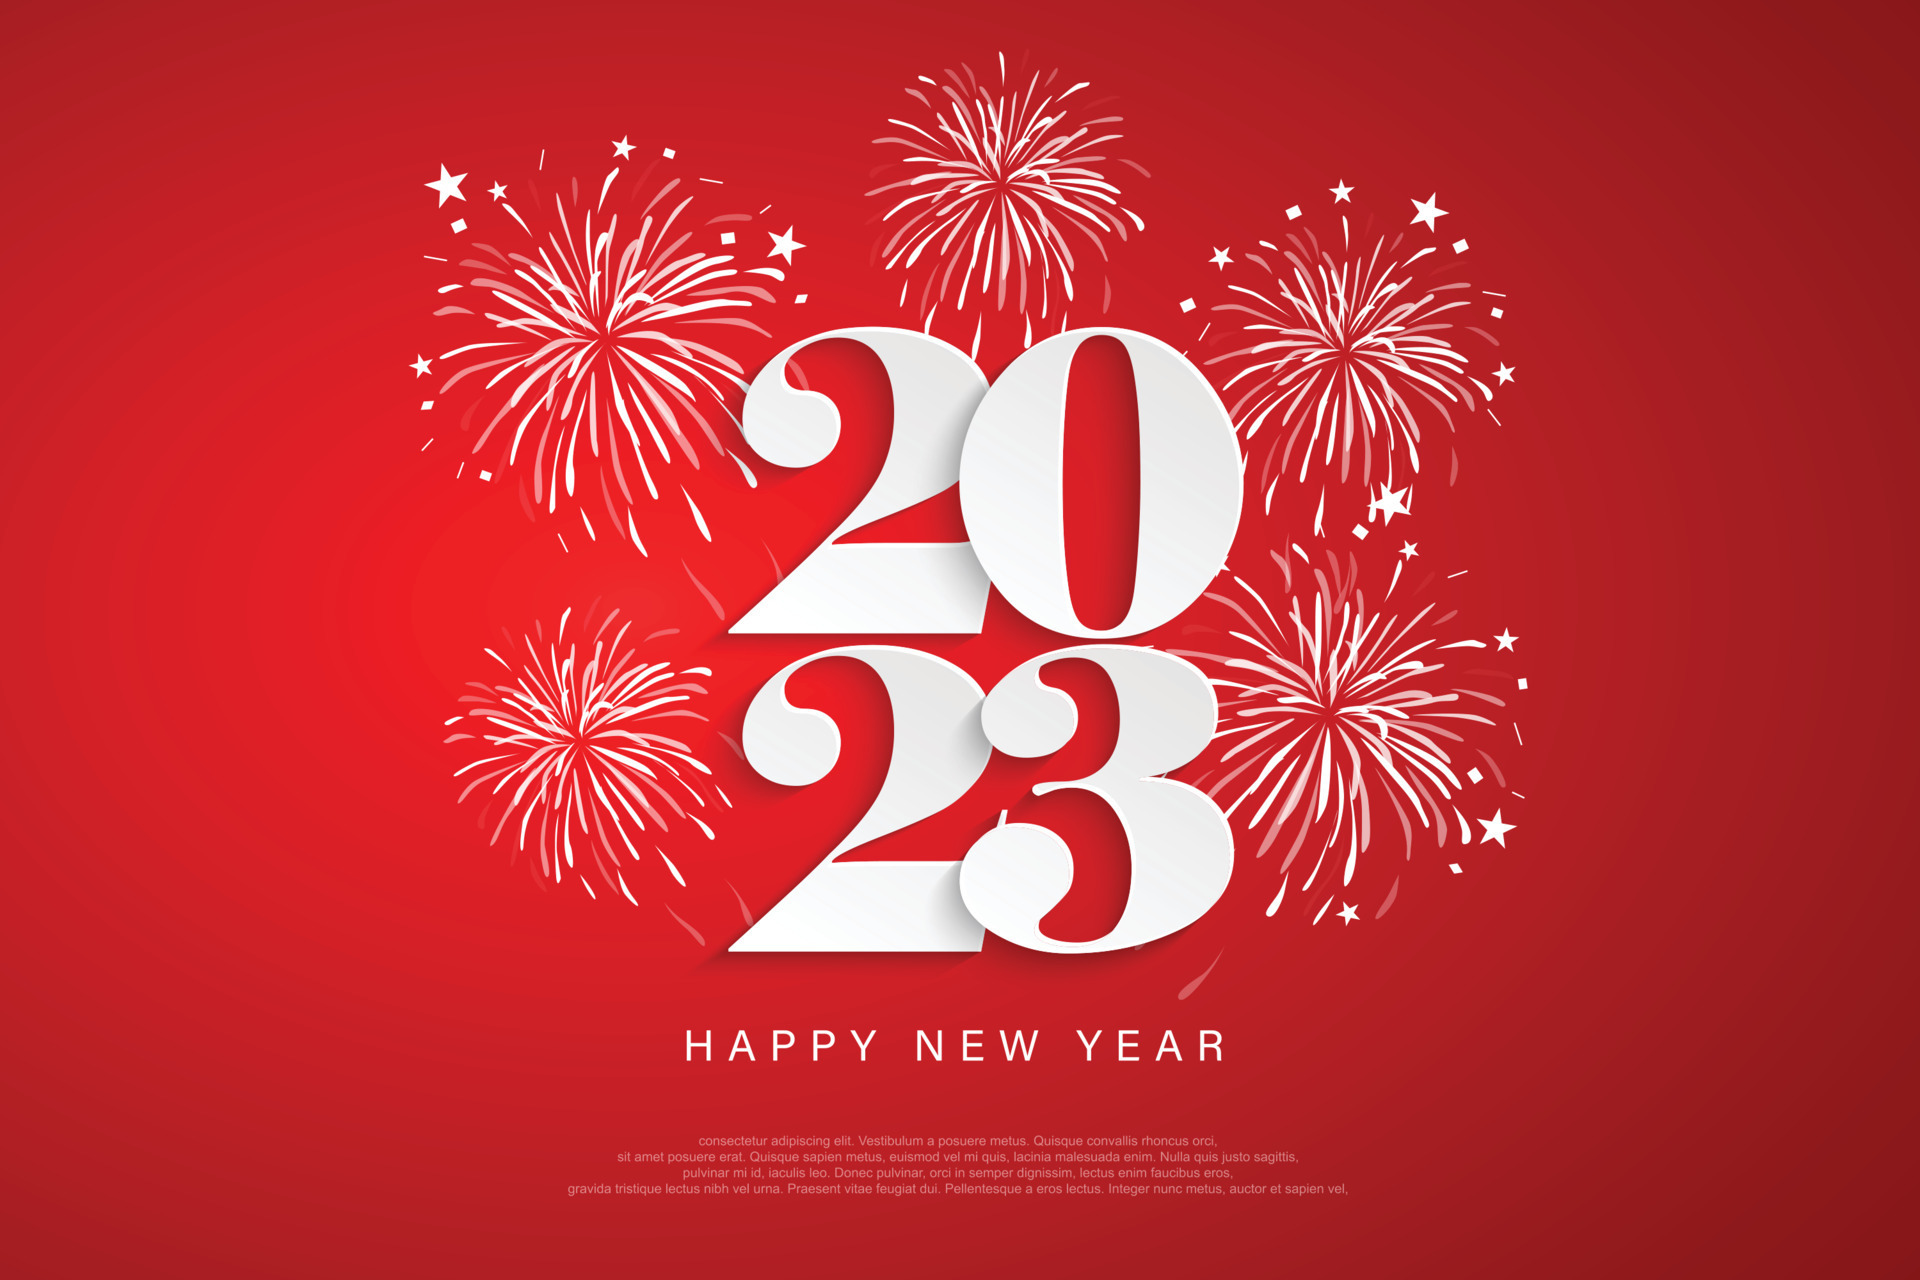 Happy New Year 2023 number design for posters, brochures, banners, websites, on red background and fireworks. Vector illustration